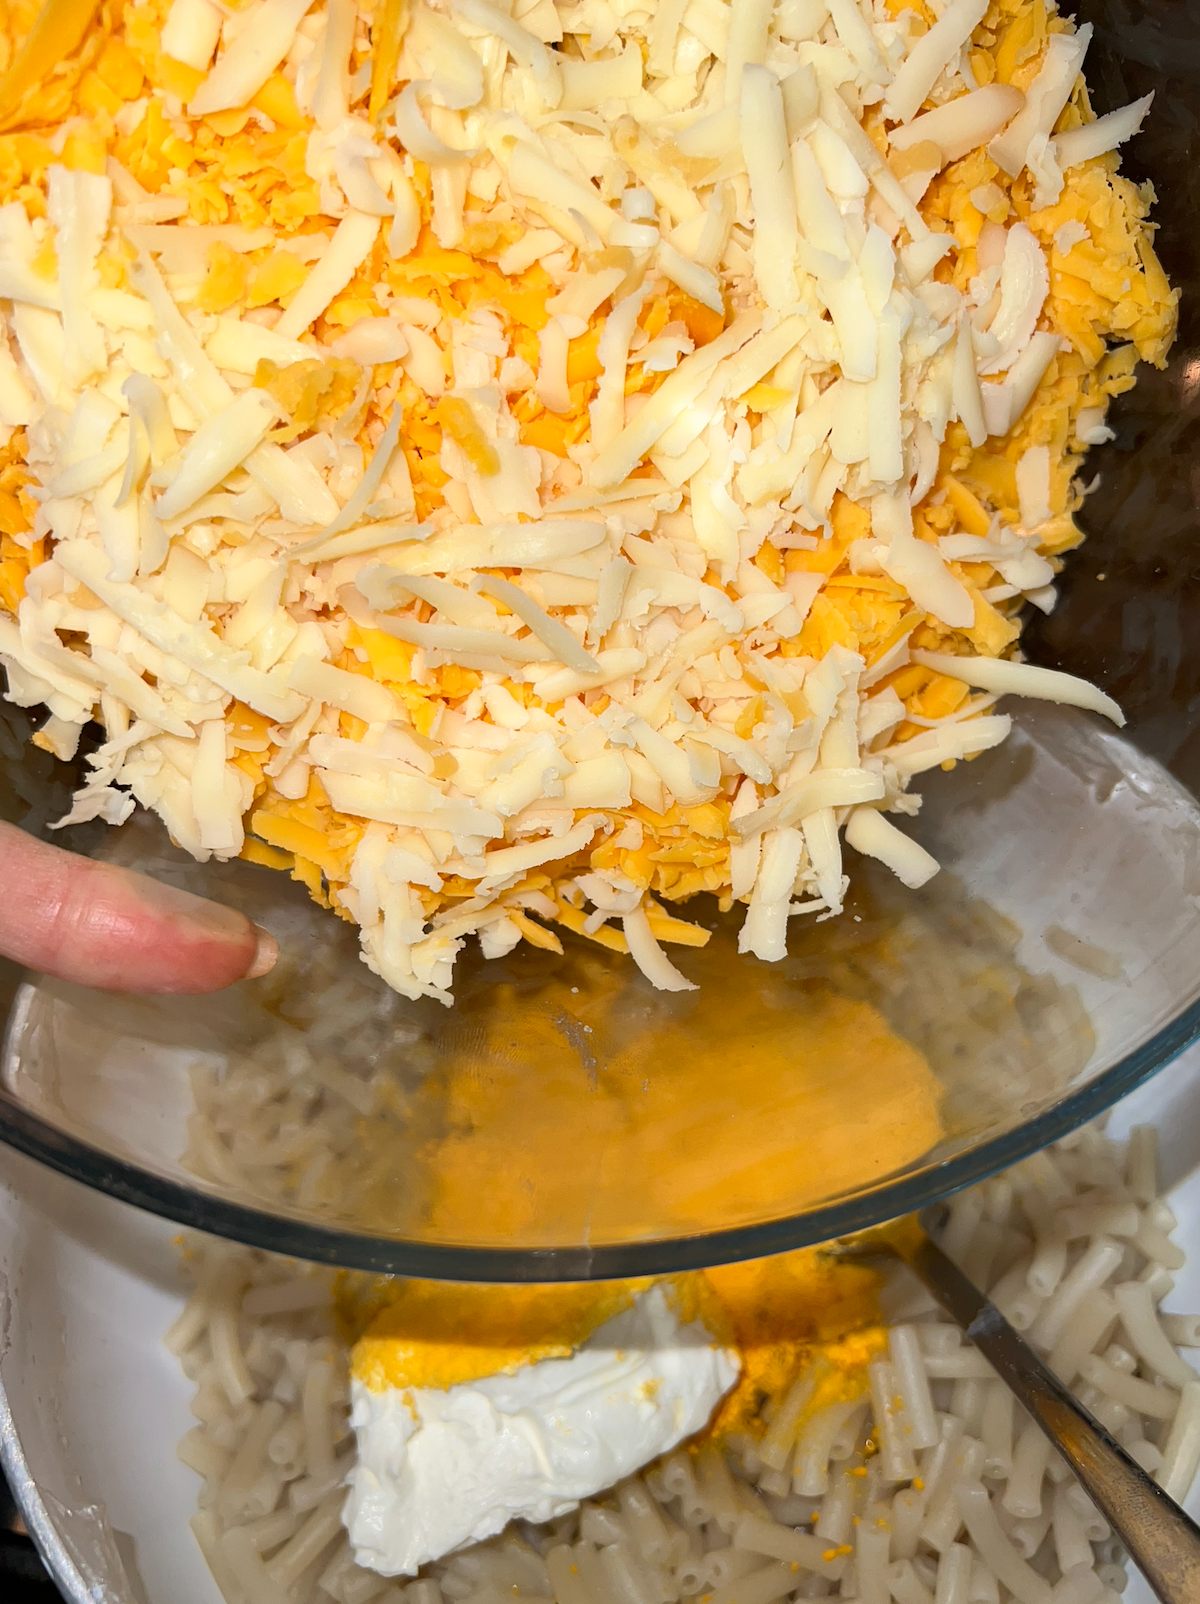 Grated cheeses being added to mac, cheese powder, and cream cheese